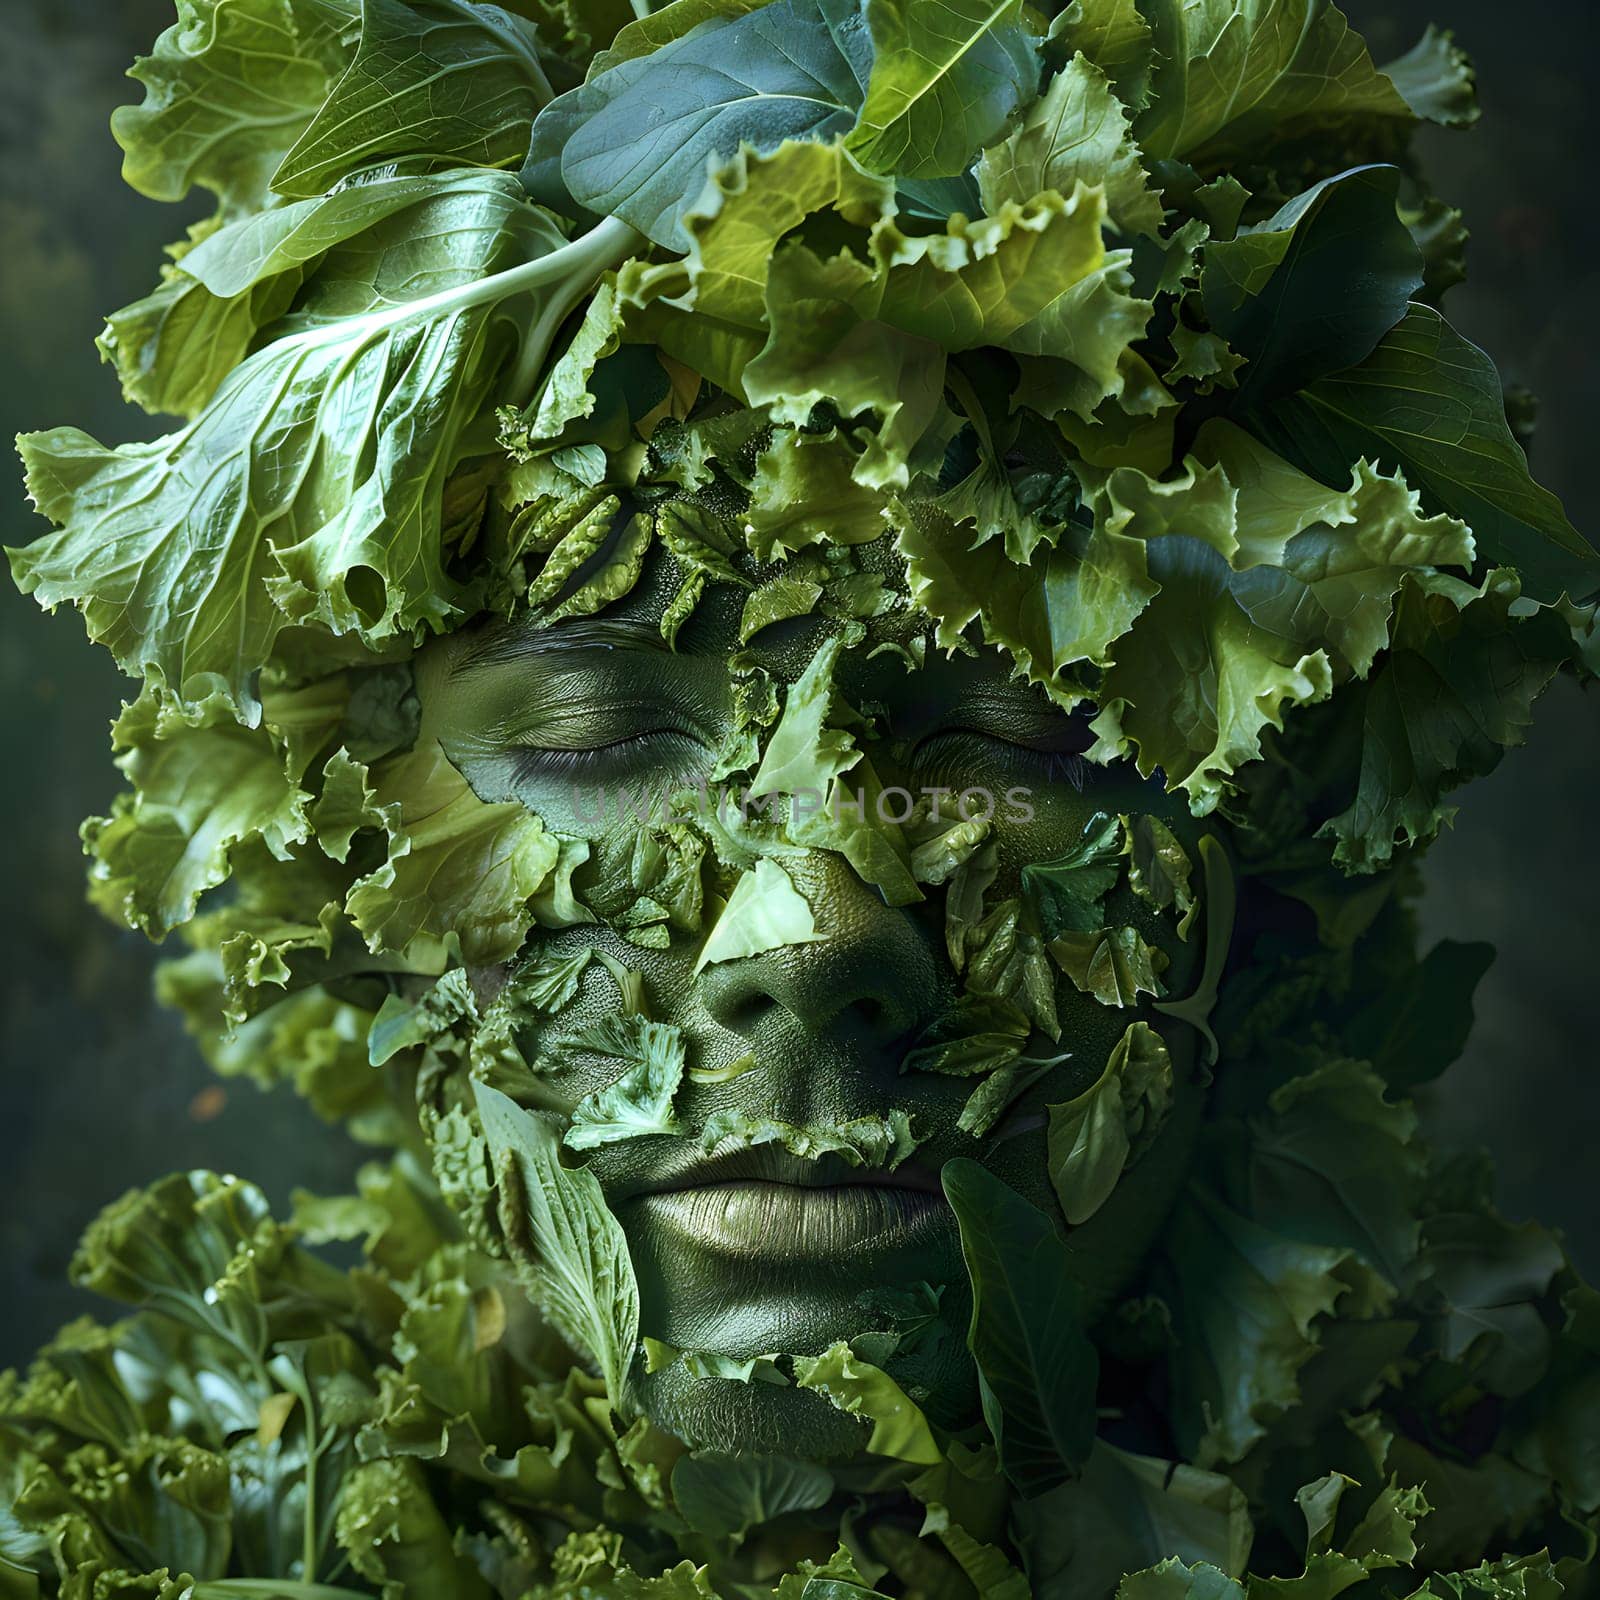 A closeup shot featuring a persons face covered in lettuce leaves, resembling a form of military camouflage in a jungle setting an artistic portrayal of nature and human connection